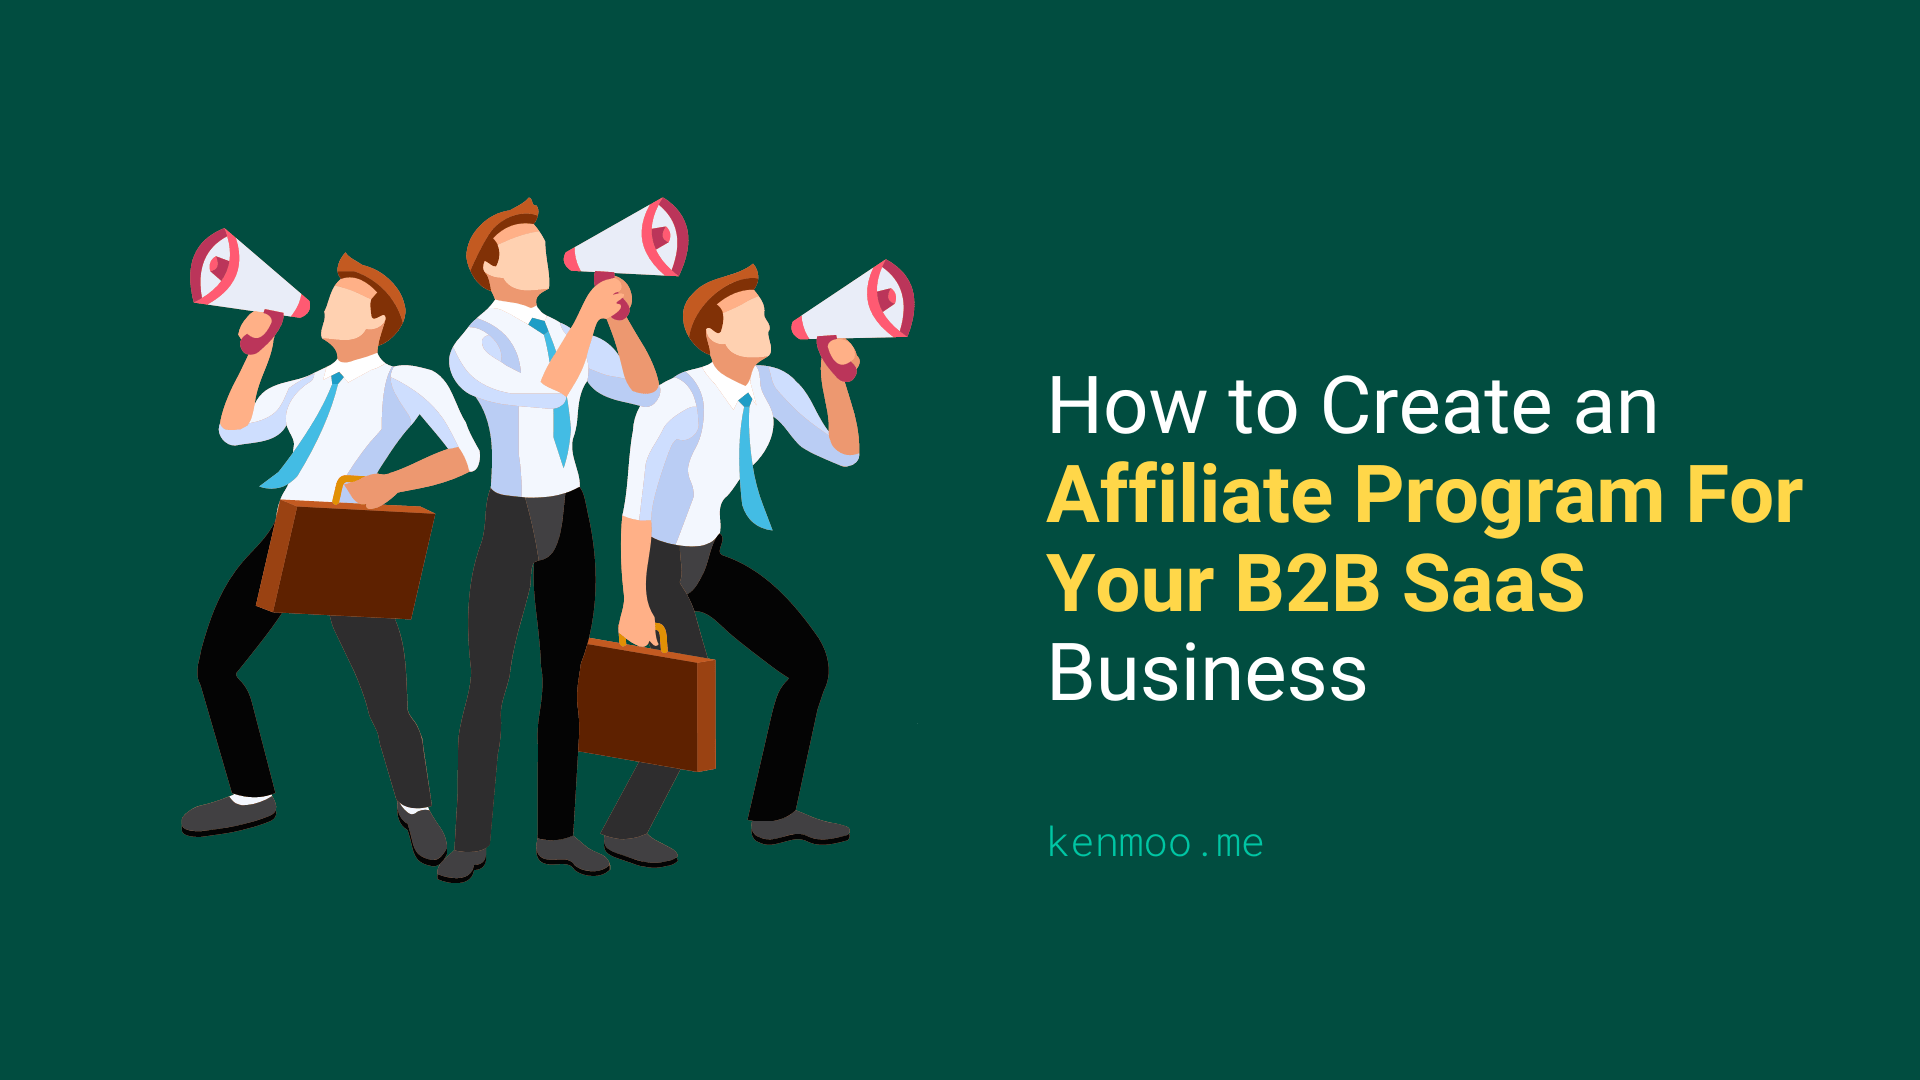 How to Create an Affiliate Program For Your B2B SaaS Business